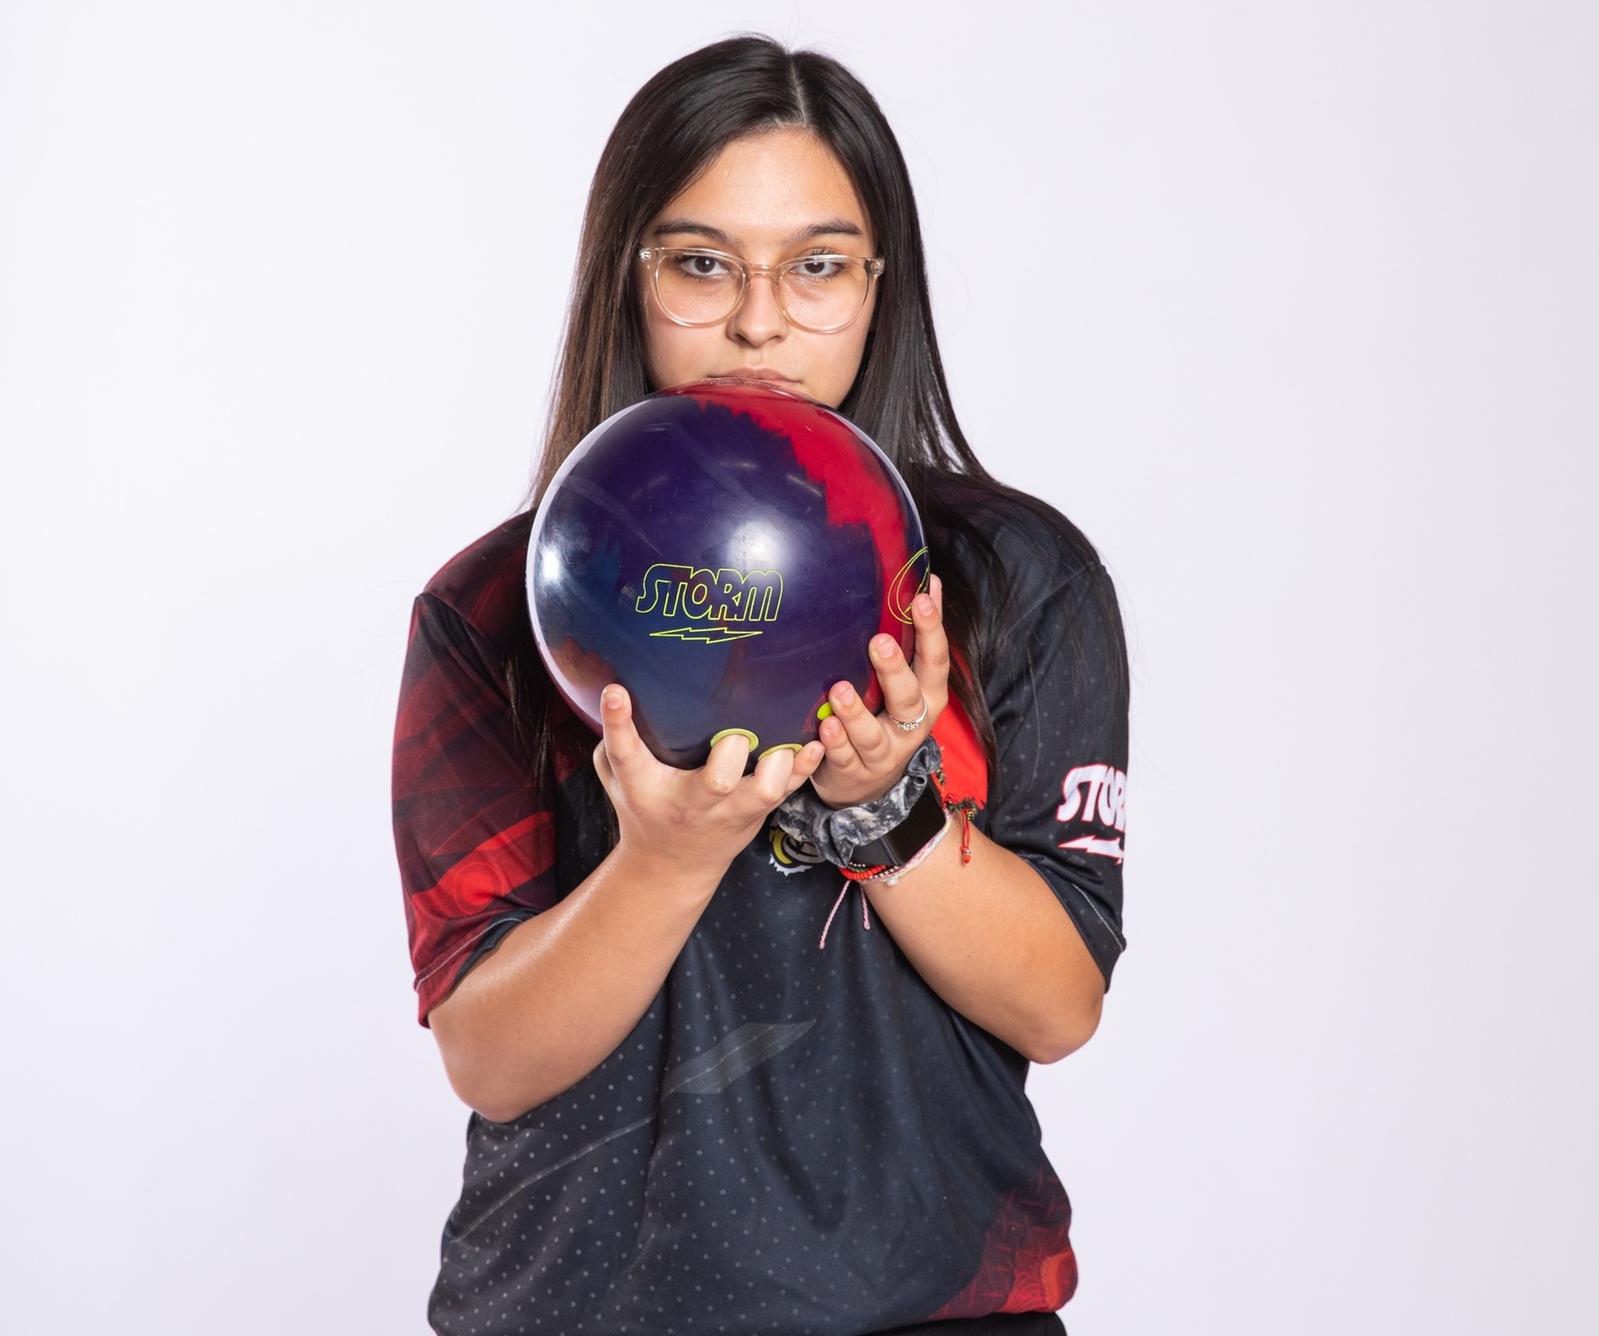 VanHorn's 1st place finish leads Women's Bowling to 4th at Scotty Classic